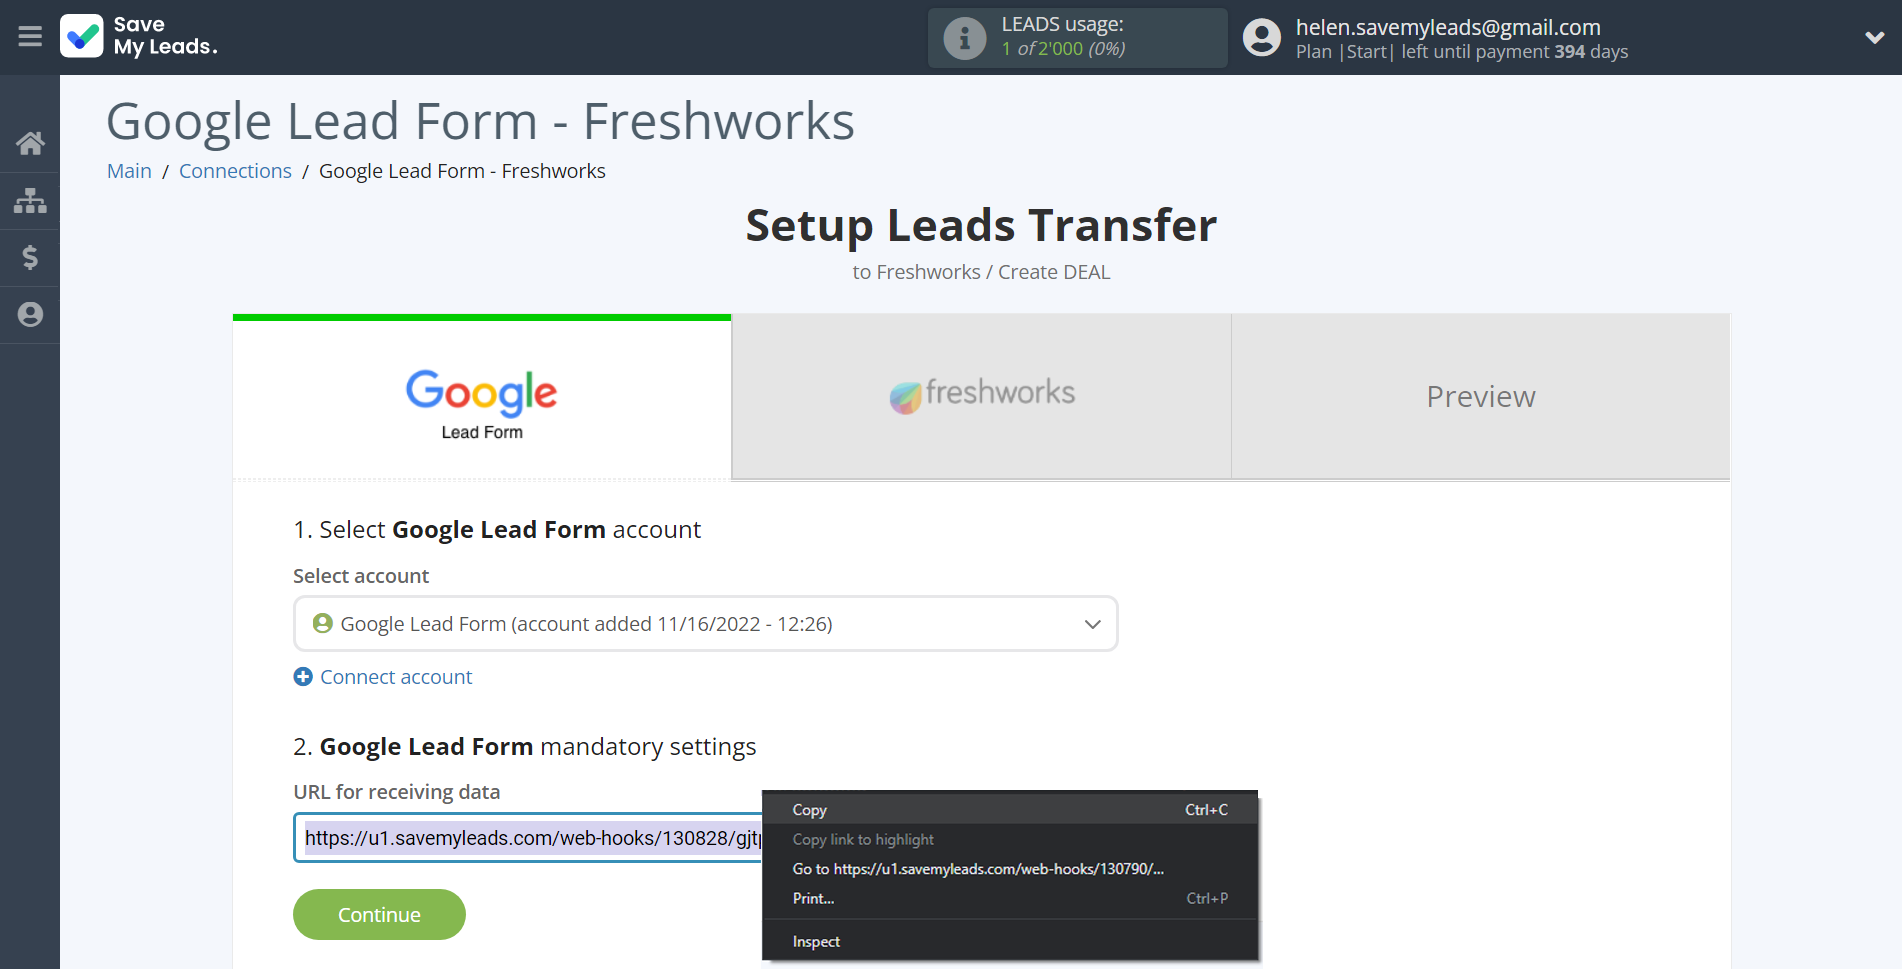 How to Connect Google Lead Form with Freshworks Create Deal | Data Source account connection